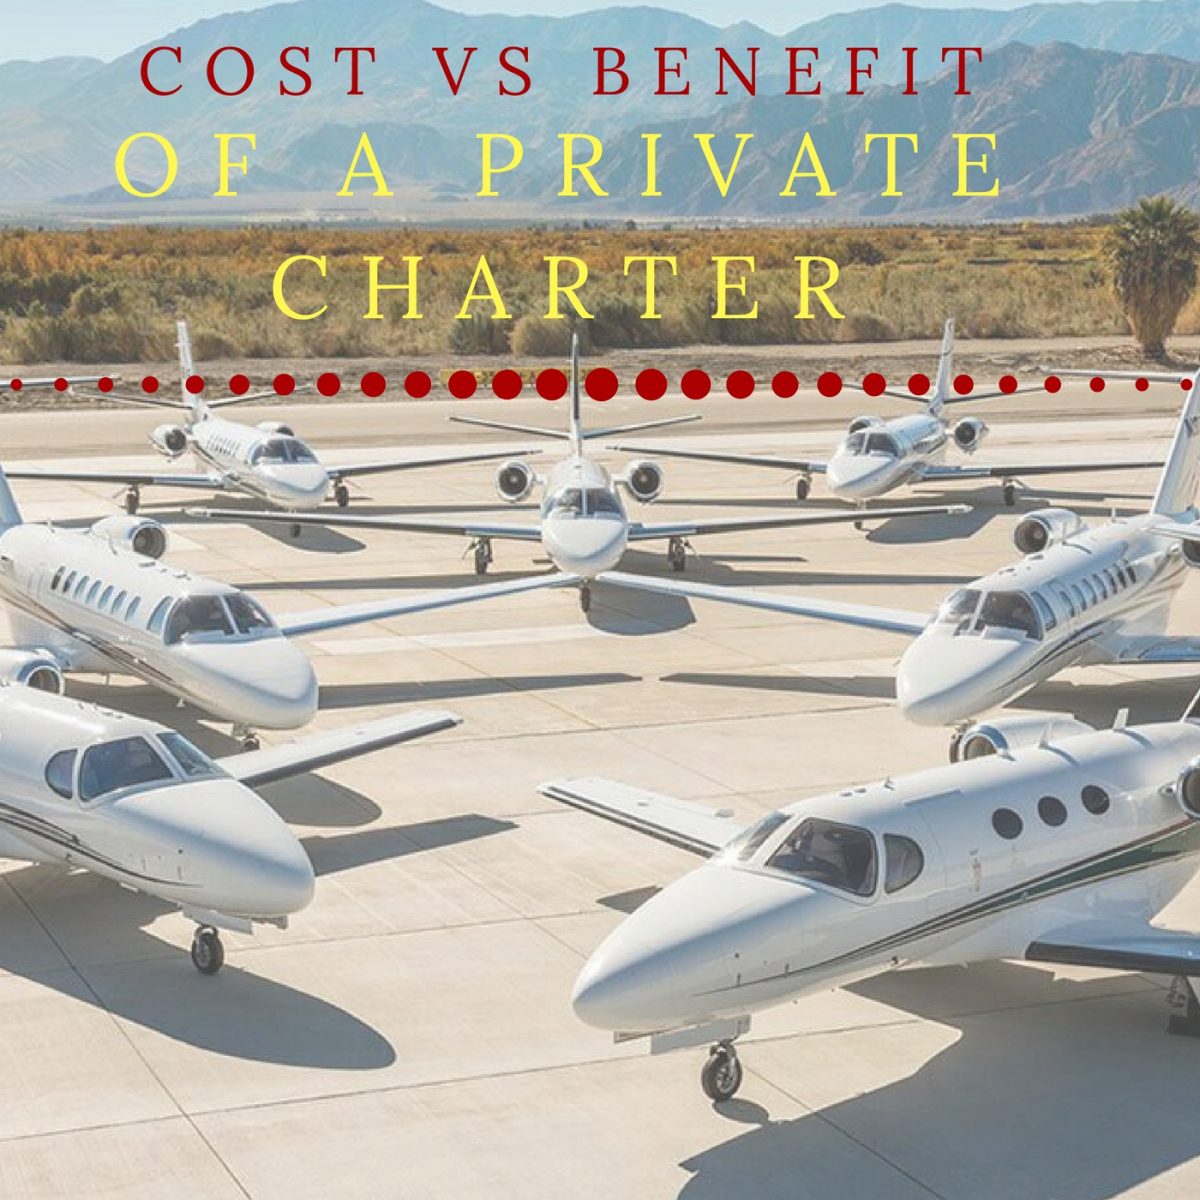 rent a private charter plane